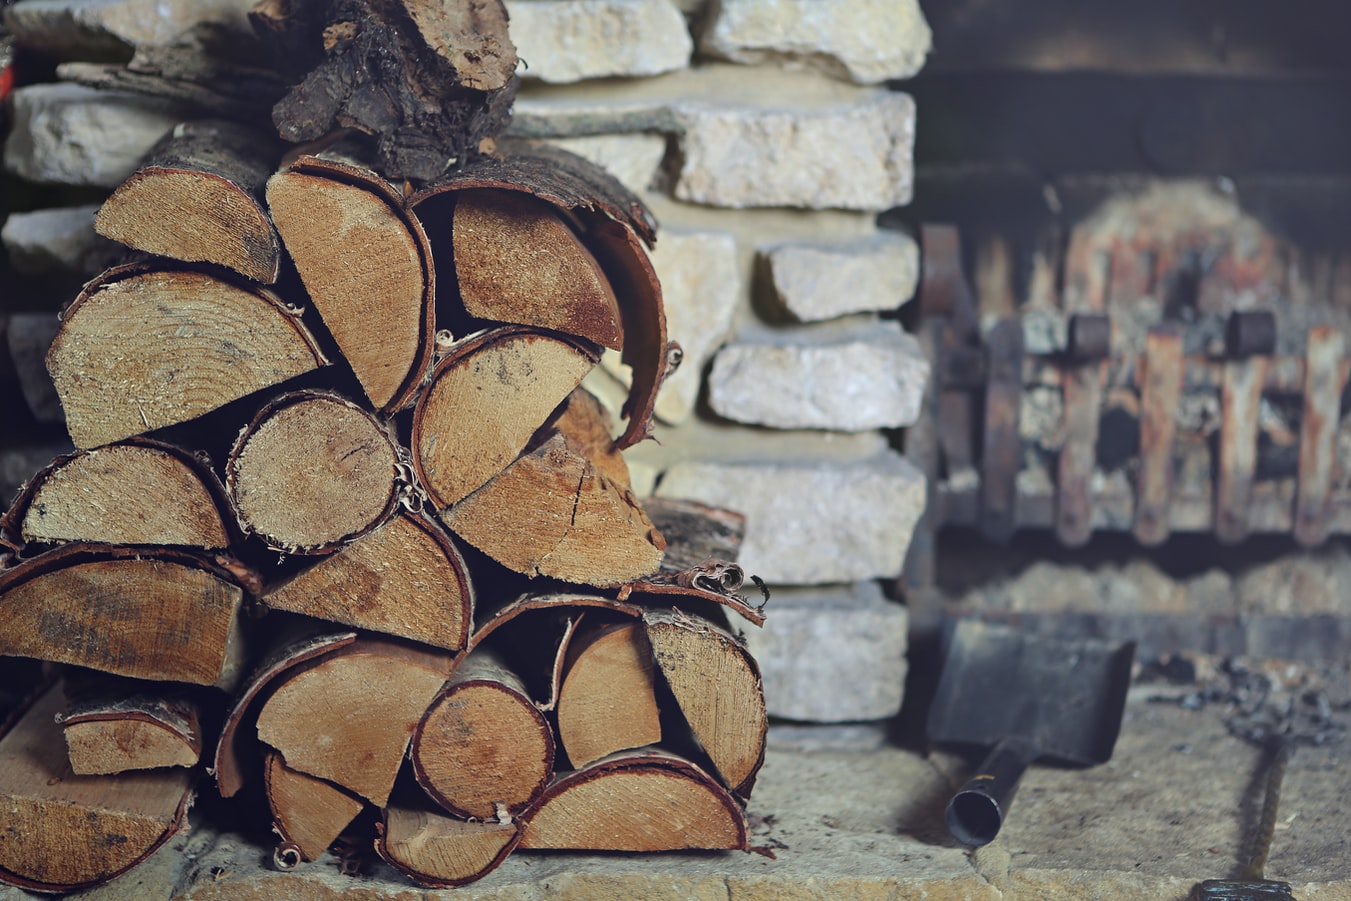 Log-Barn Kiln Dried Logs & Firewood, Delivered Throughout The UK!